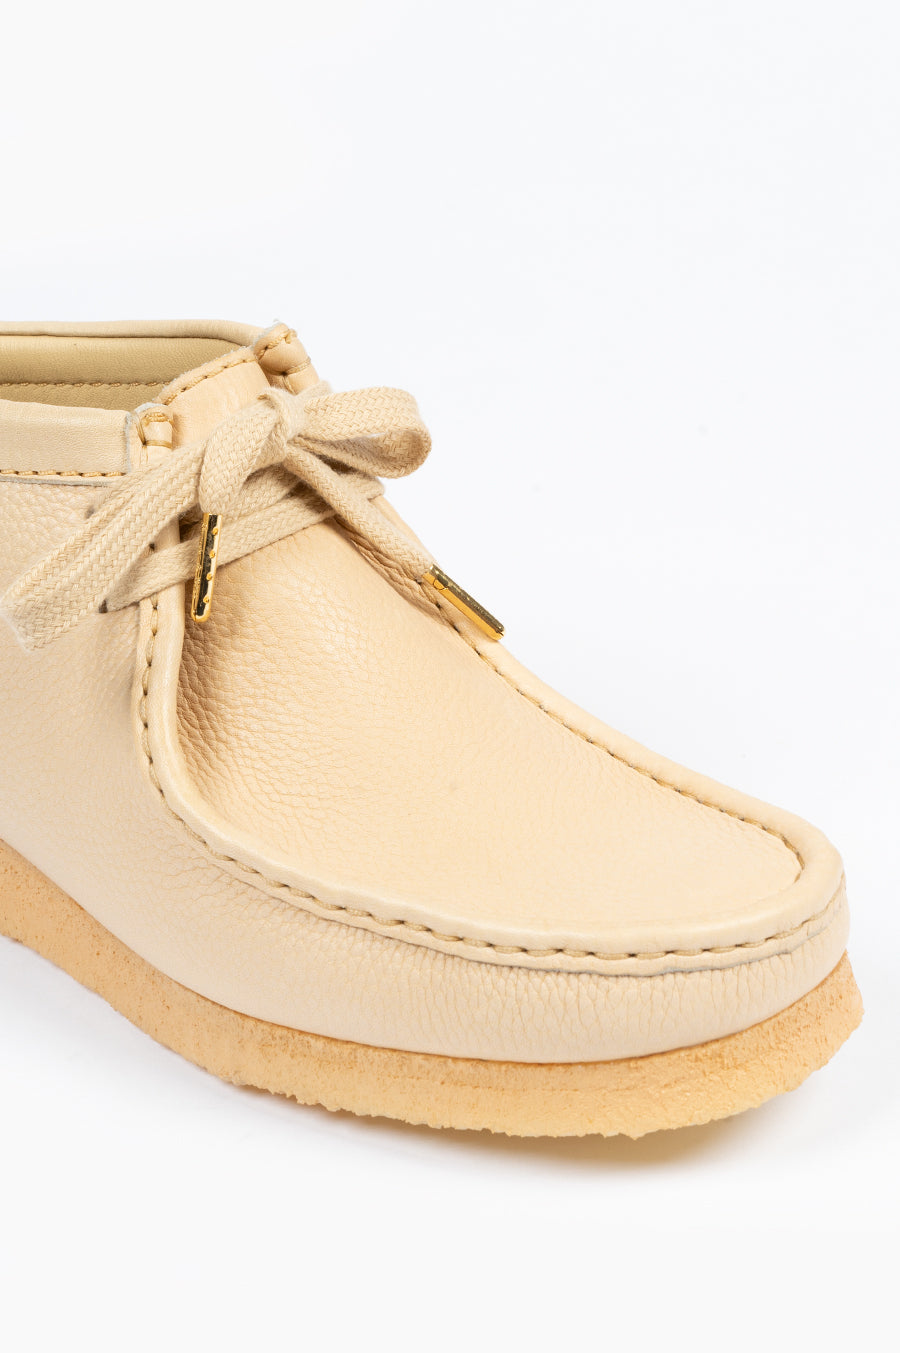 CLARKS X SPORTY & RICH BOOT CREAM PUFF LEATHER –